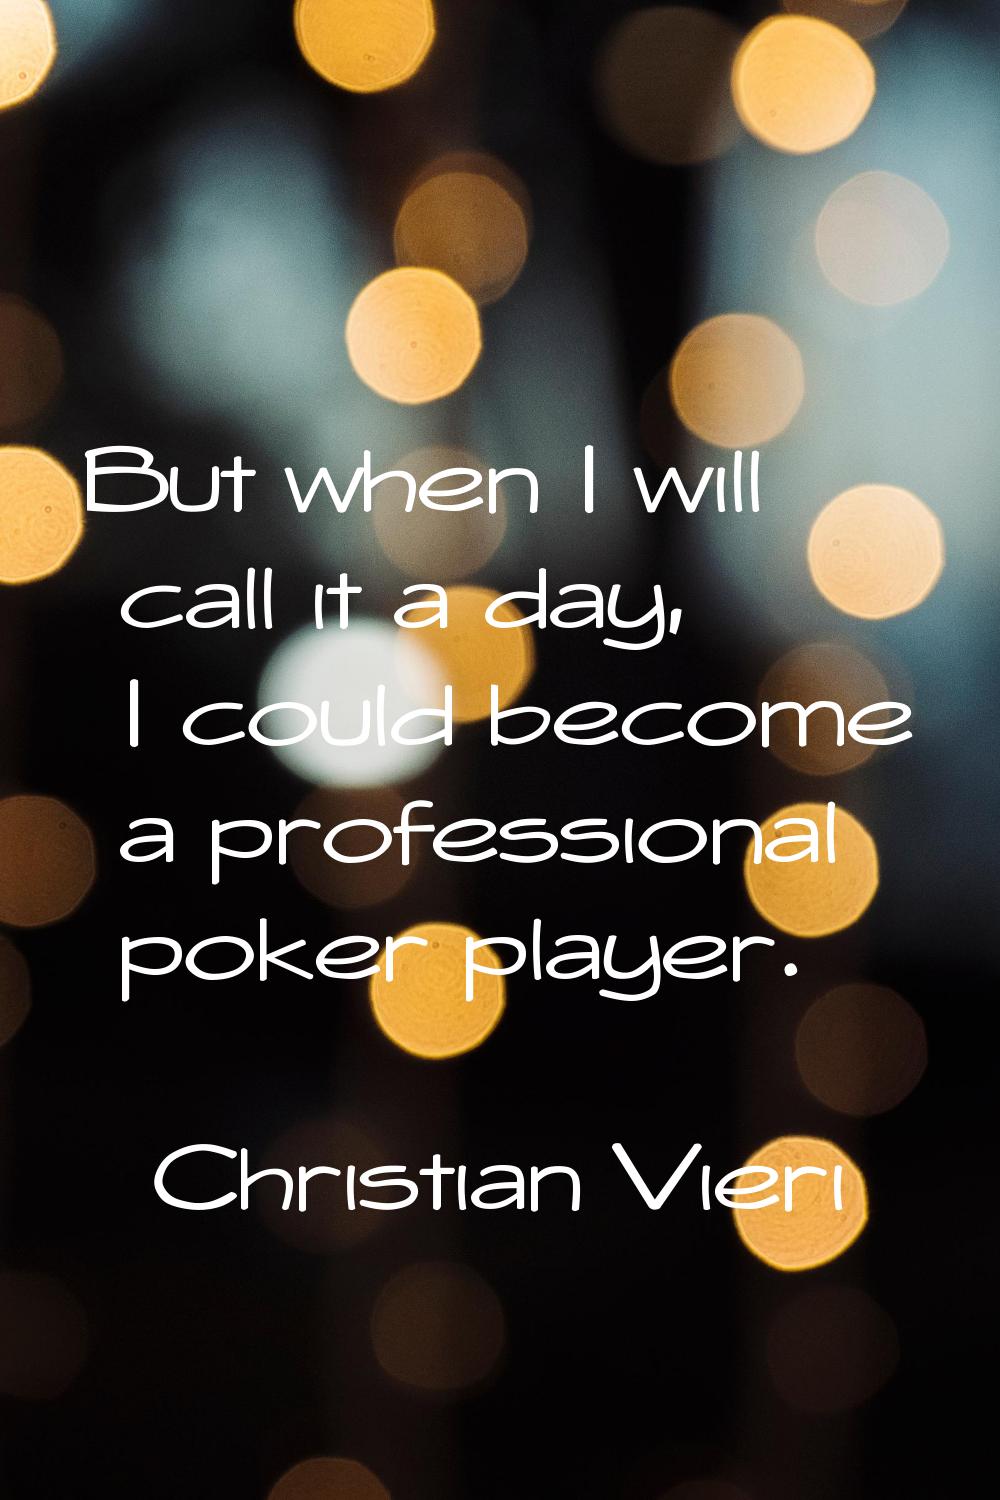 But when I will call it a day, I could become a professional poker player.